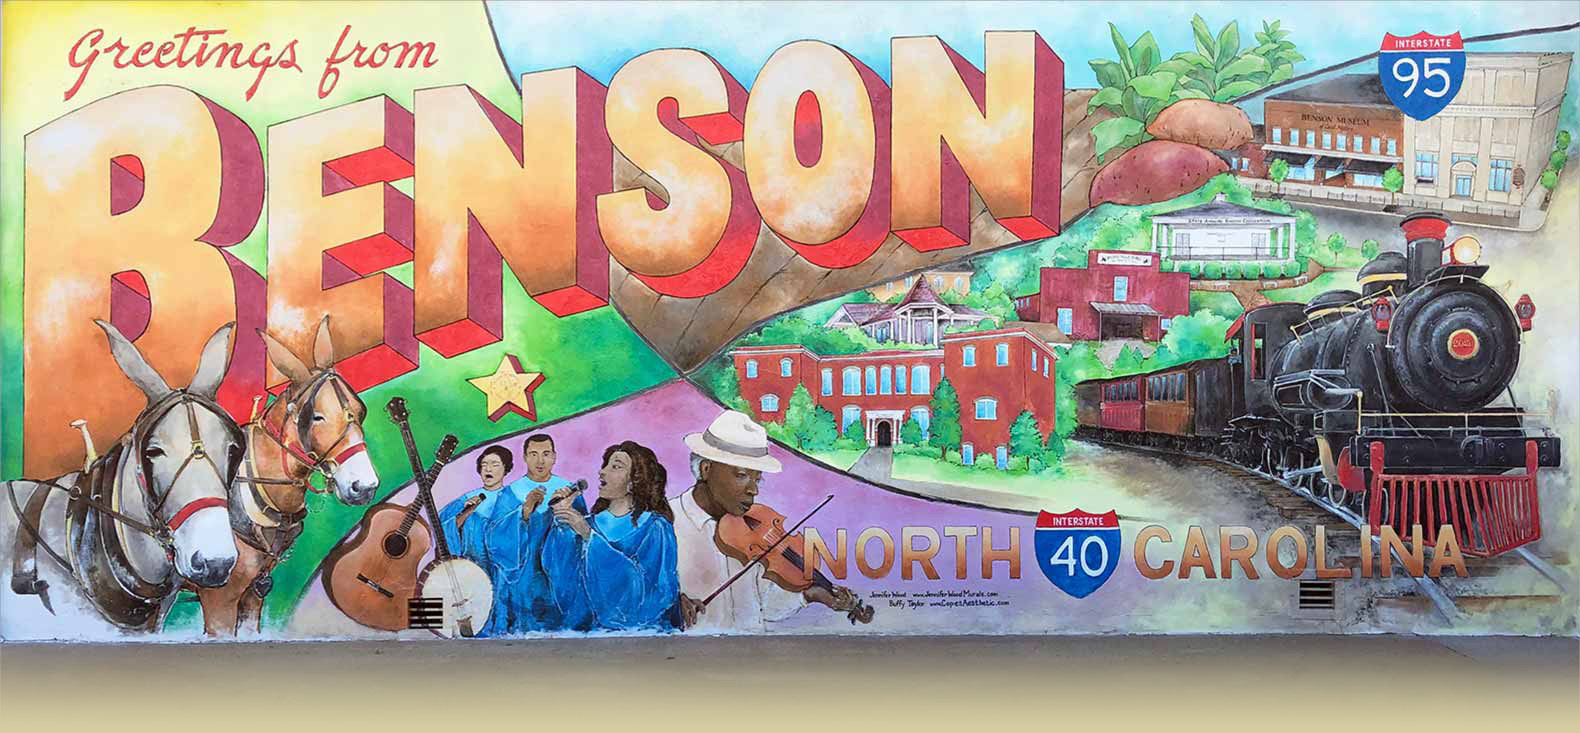 Greetings from Benson North Carolina Mural with horses, musicians, historic buildings and a locomotive